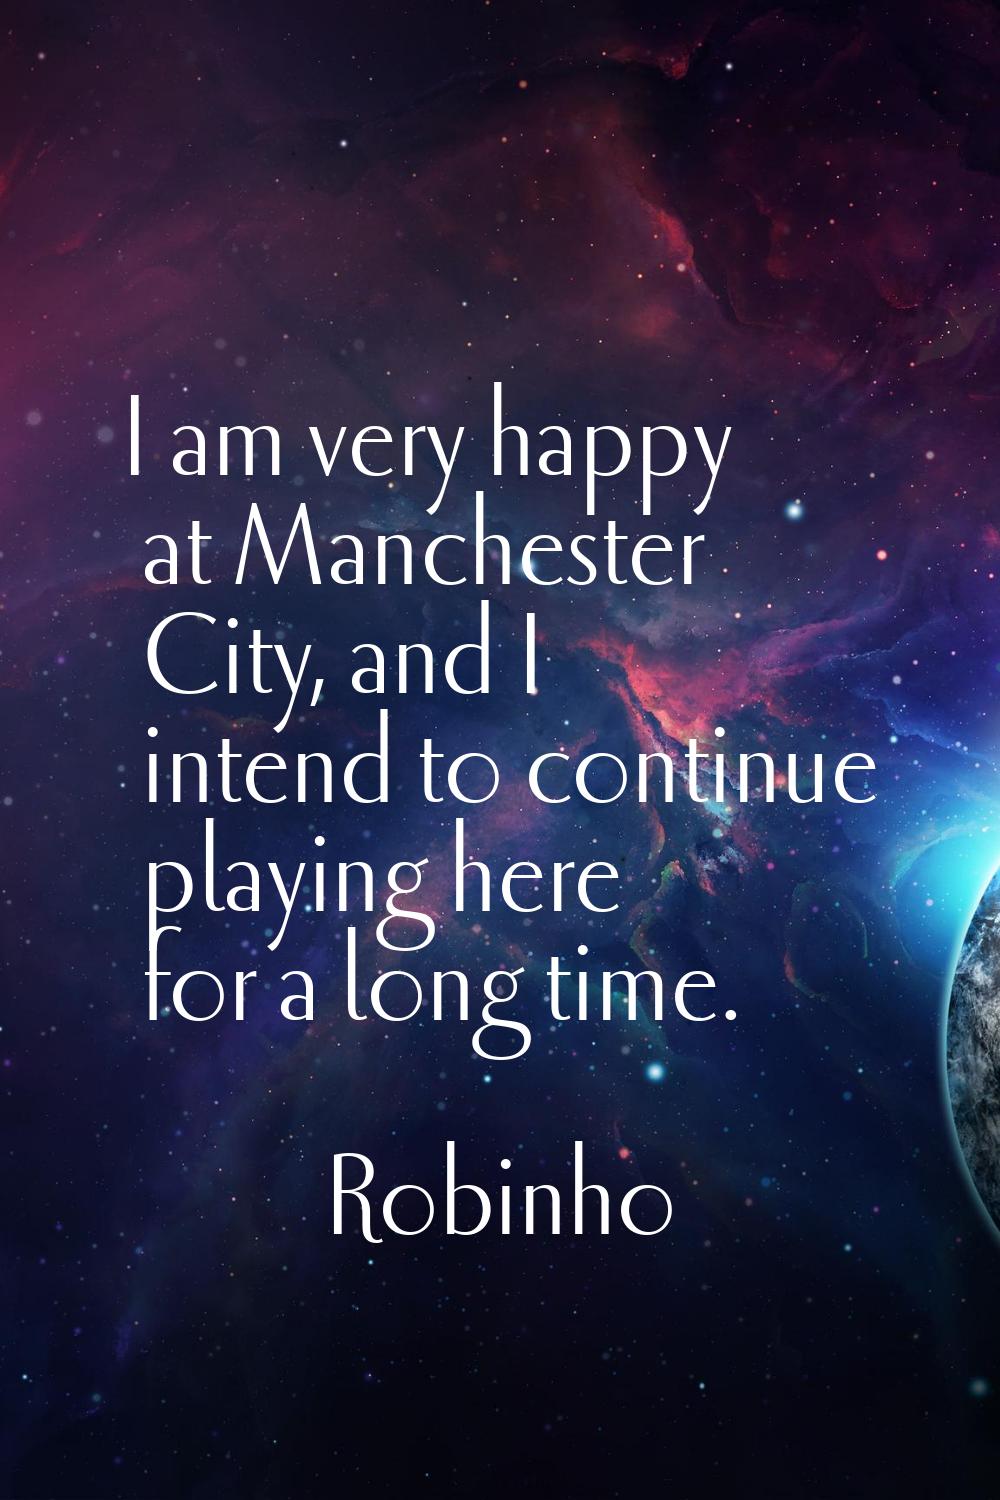 I am very happy at Manchester City, and I intend to continue playing here for a long time.